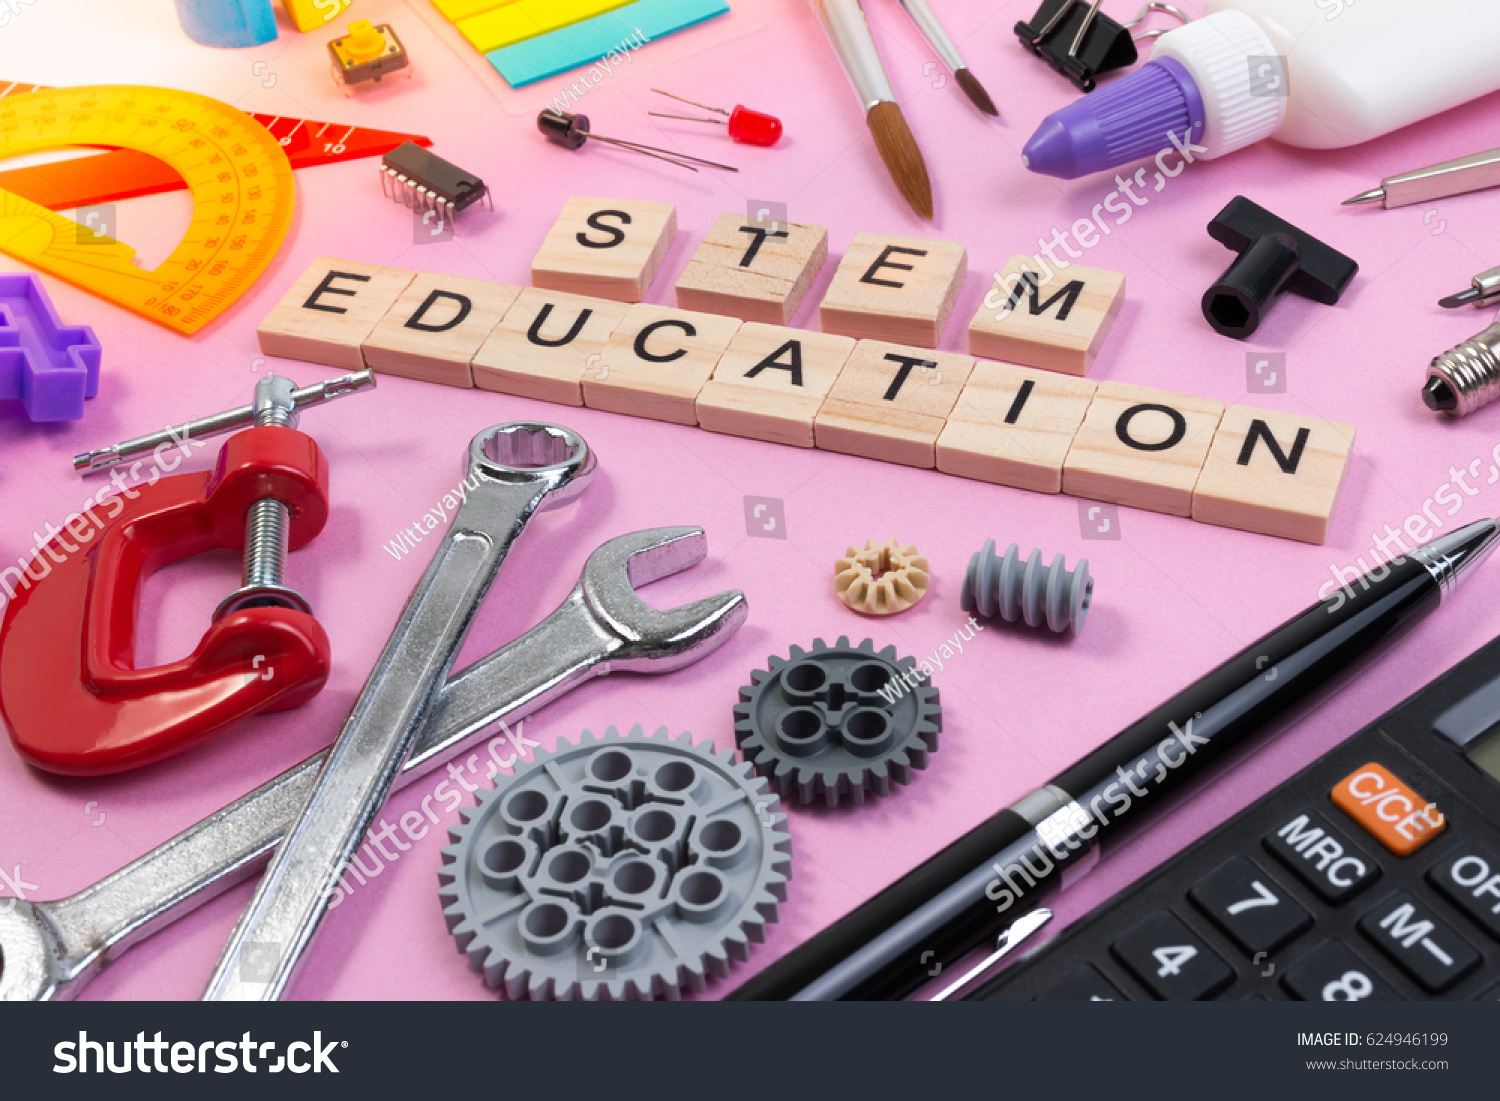 School equipment with word STEM Education over pink background in education STEM concept. School desk with stationery tools for STEM learning. #624946199